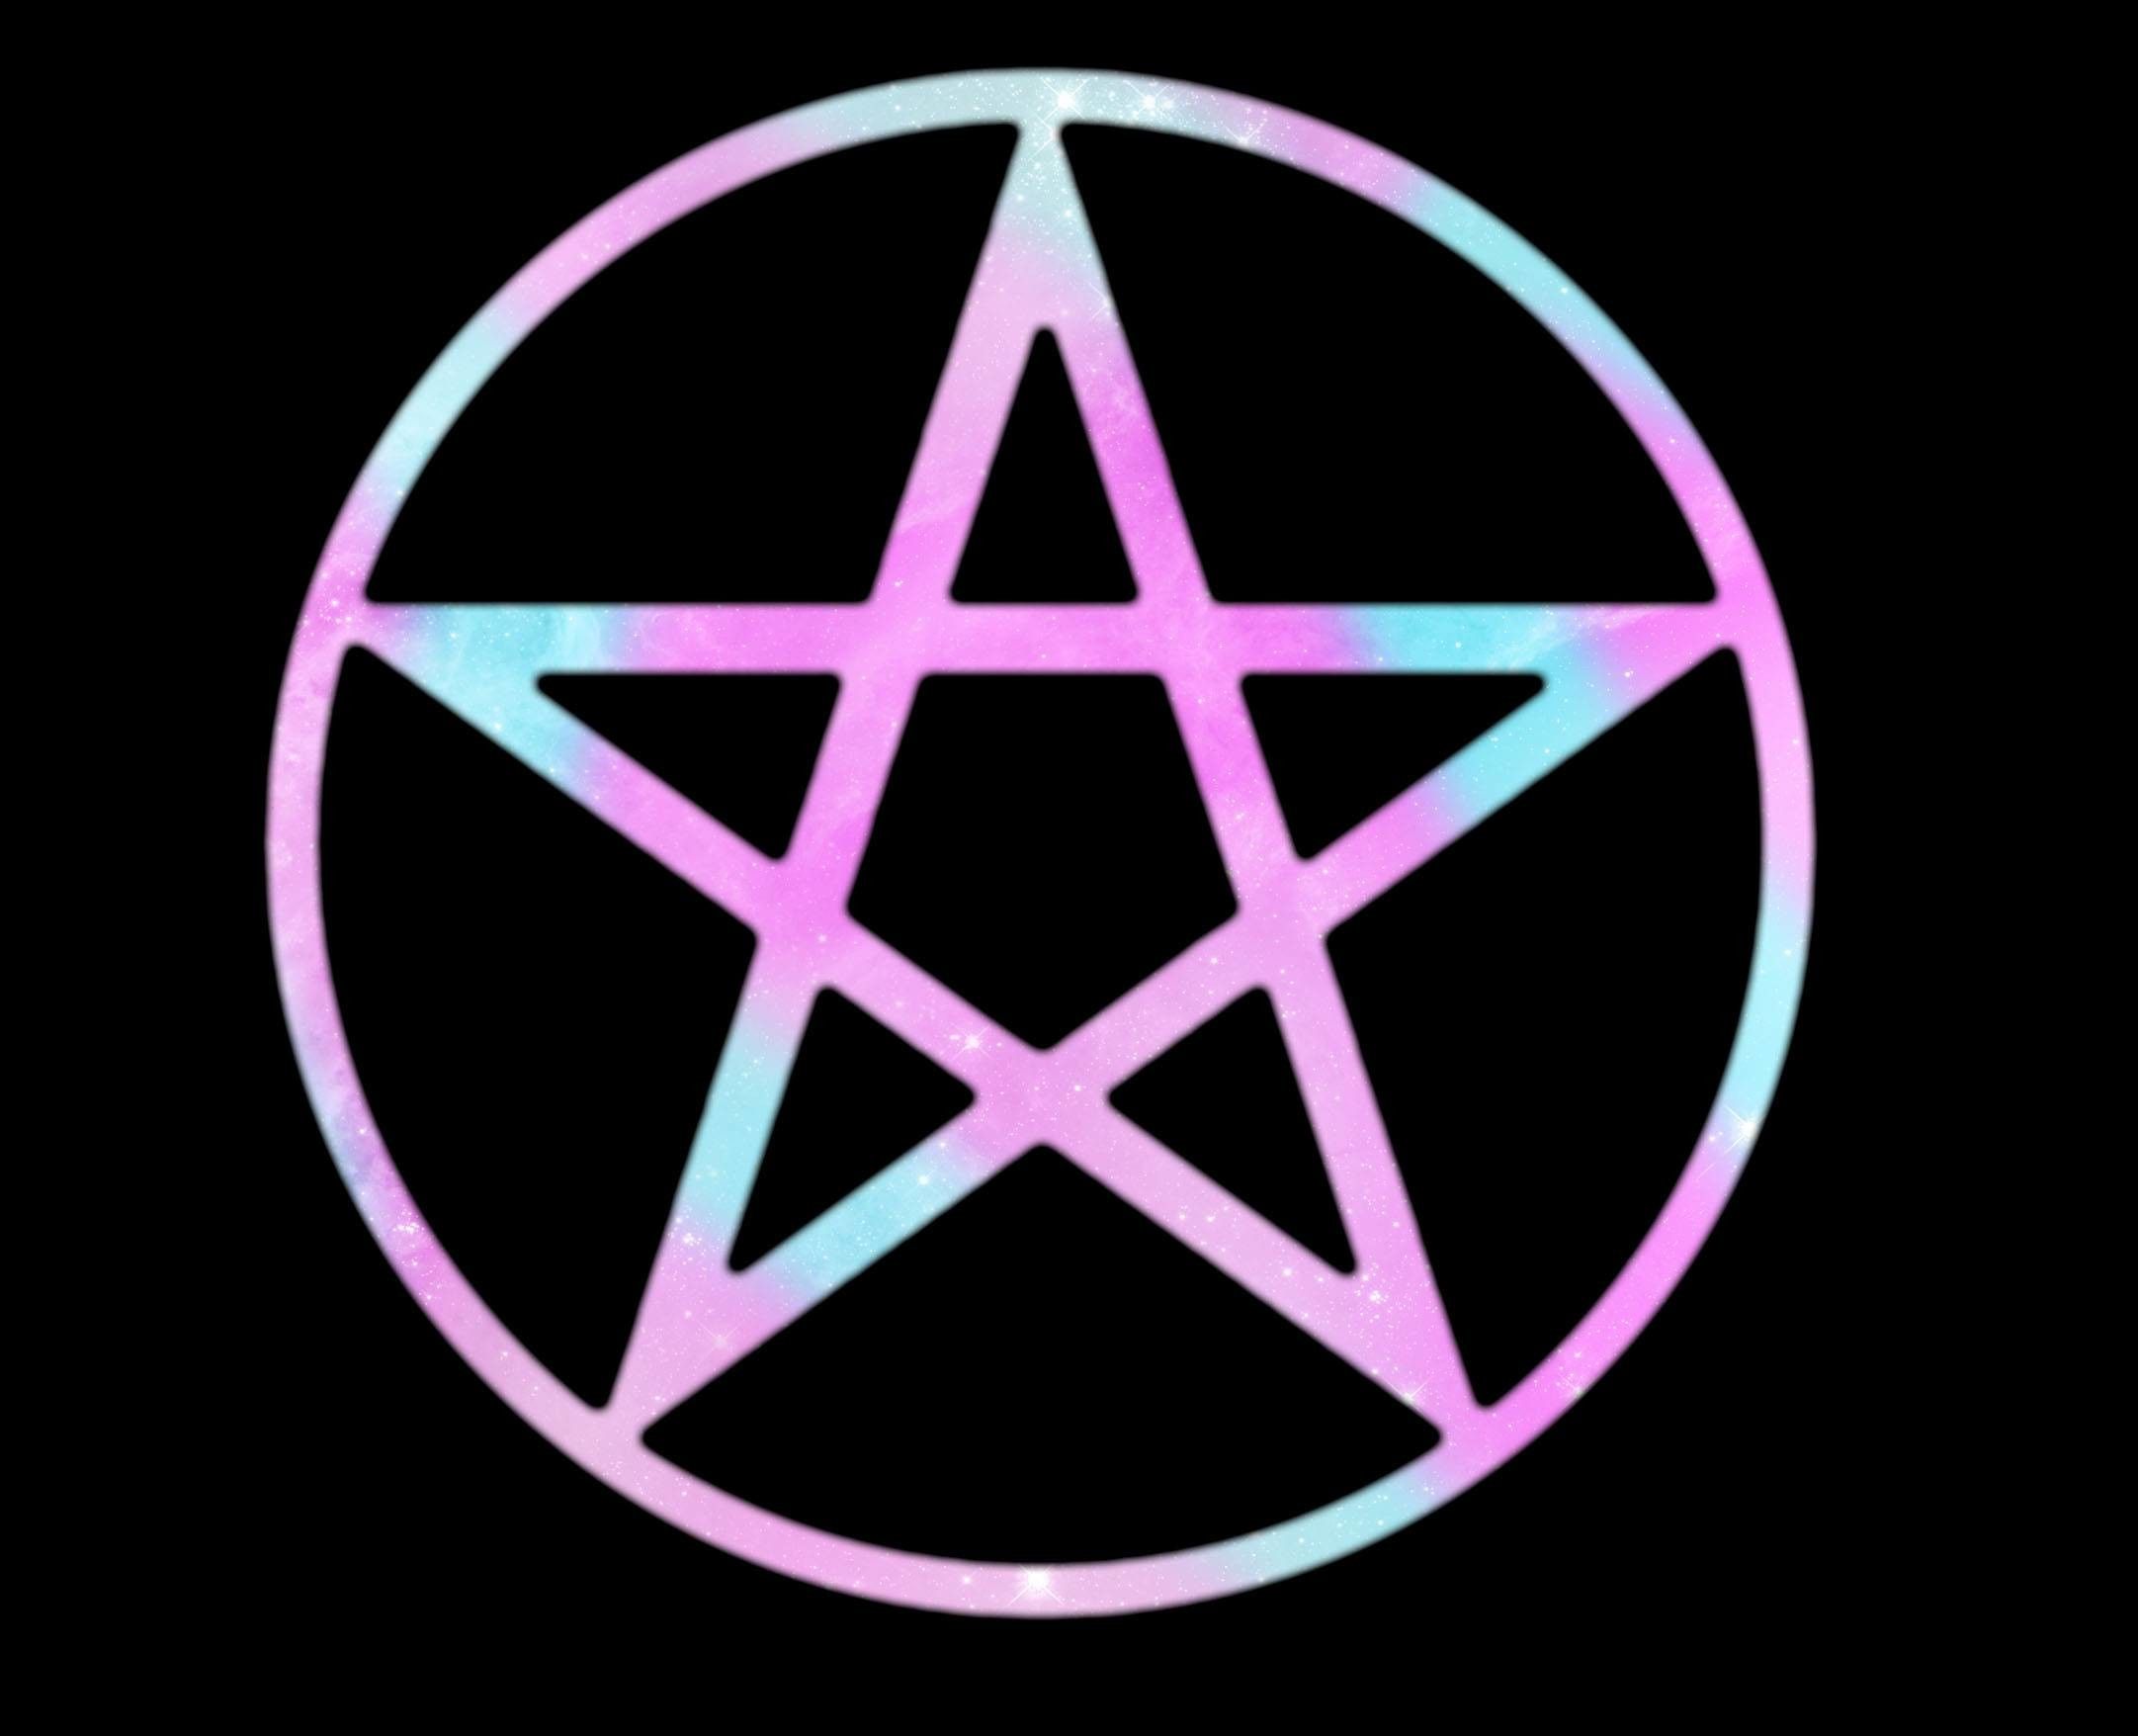 A pentagram in the center of an image - Gothic